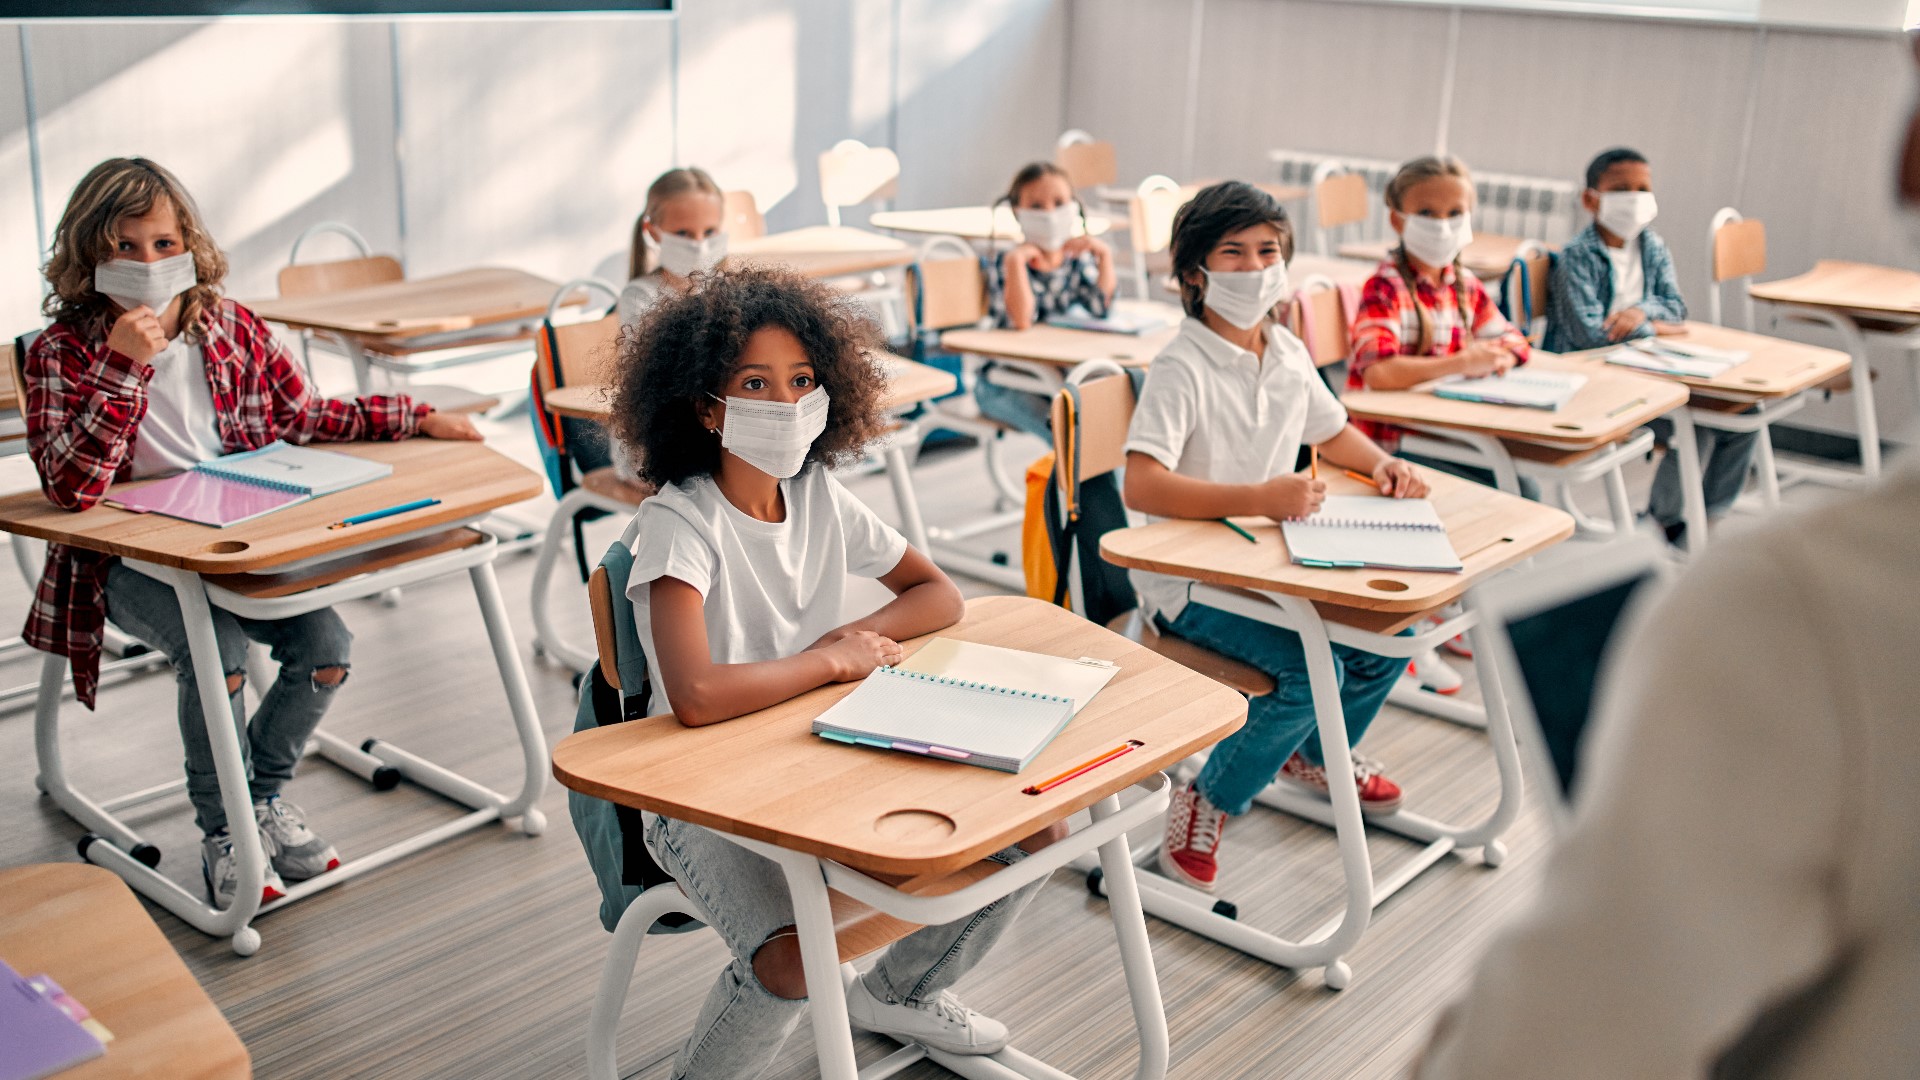 The face mask guidelines from the American Academy of Pediatrics differ from updated school recommendations the CDC announced recently.